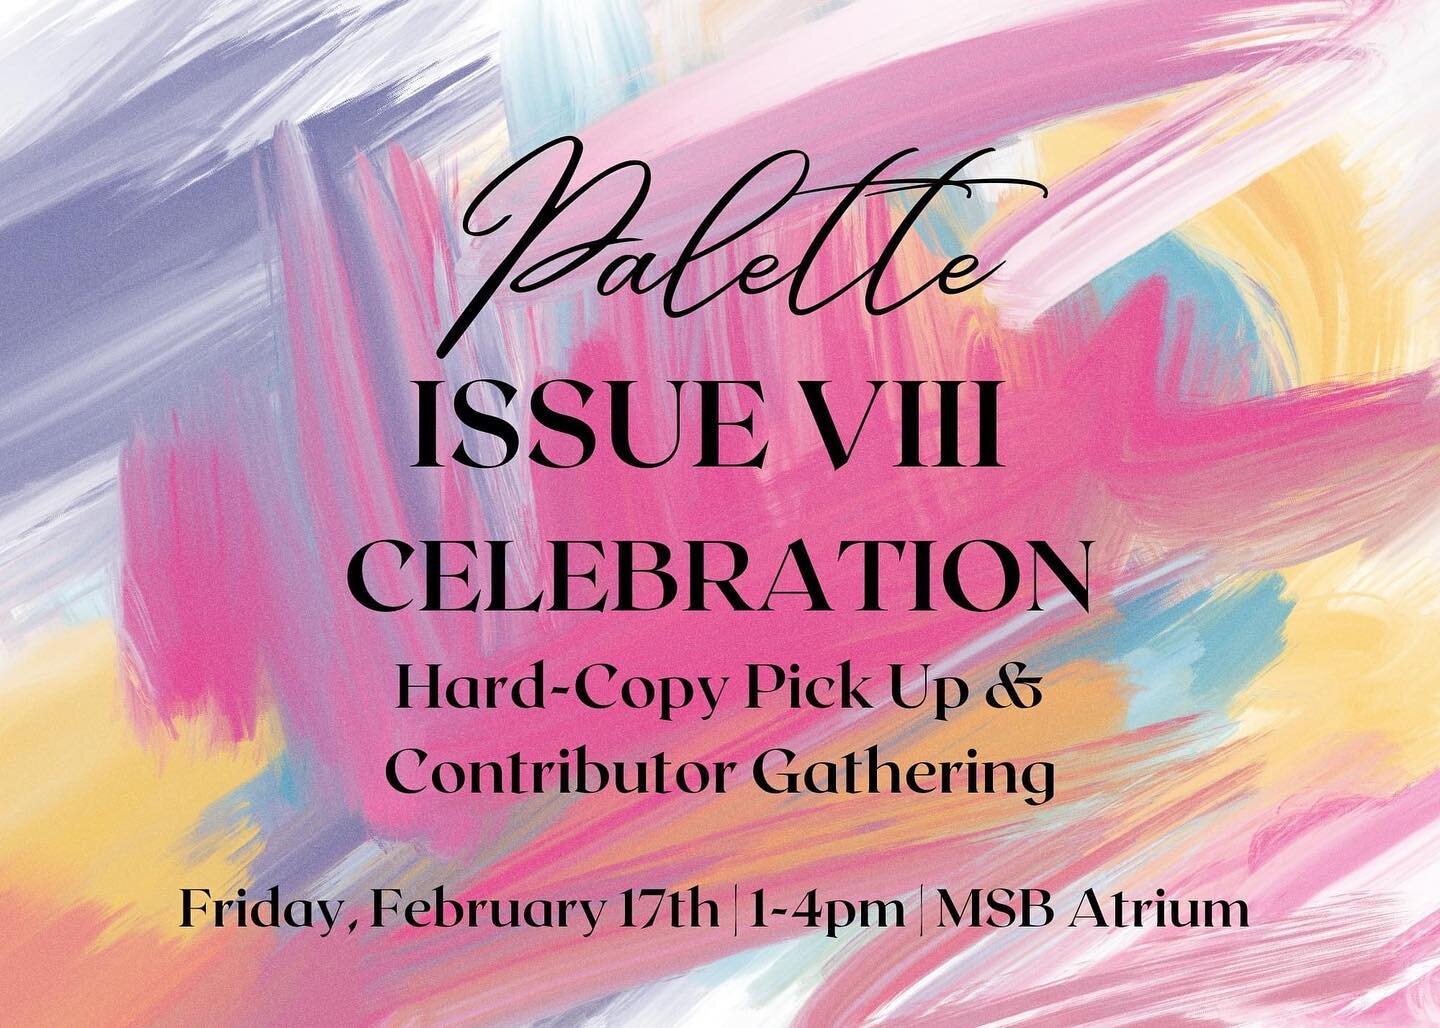 TLDR; Palette ISSUE VIII Celebration! Hard-Copy Pick-Up and Contributor Gathering

Palette is excited to announce that we're celebrating our launch of Issue VIII this *Friday, February 17th from 1-4pm at the MSB Atrium* with the contributors from thi